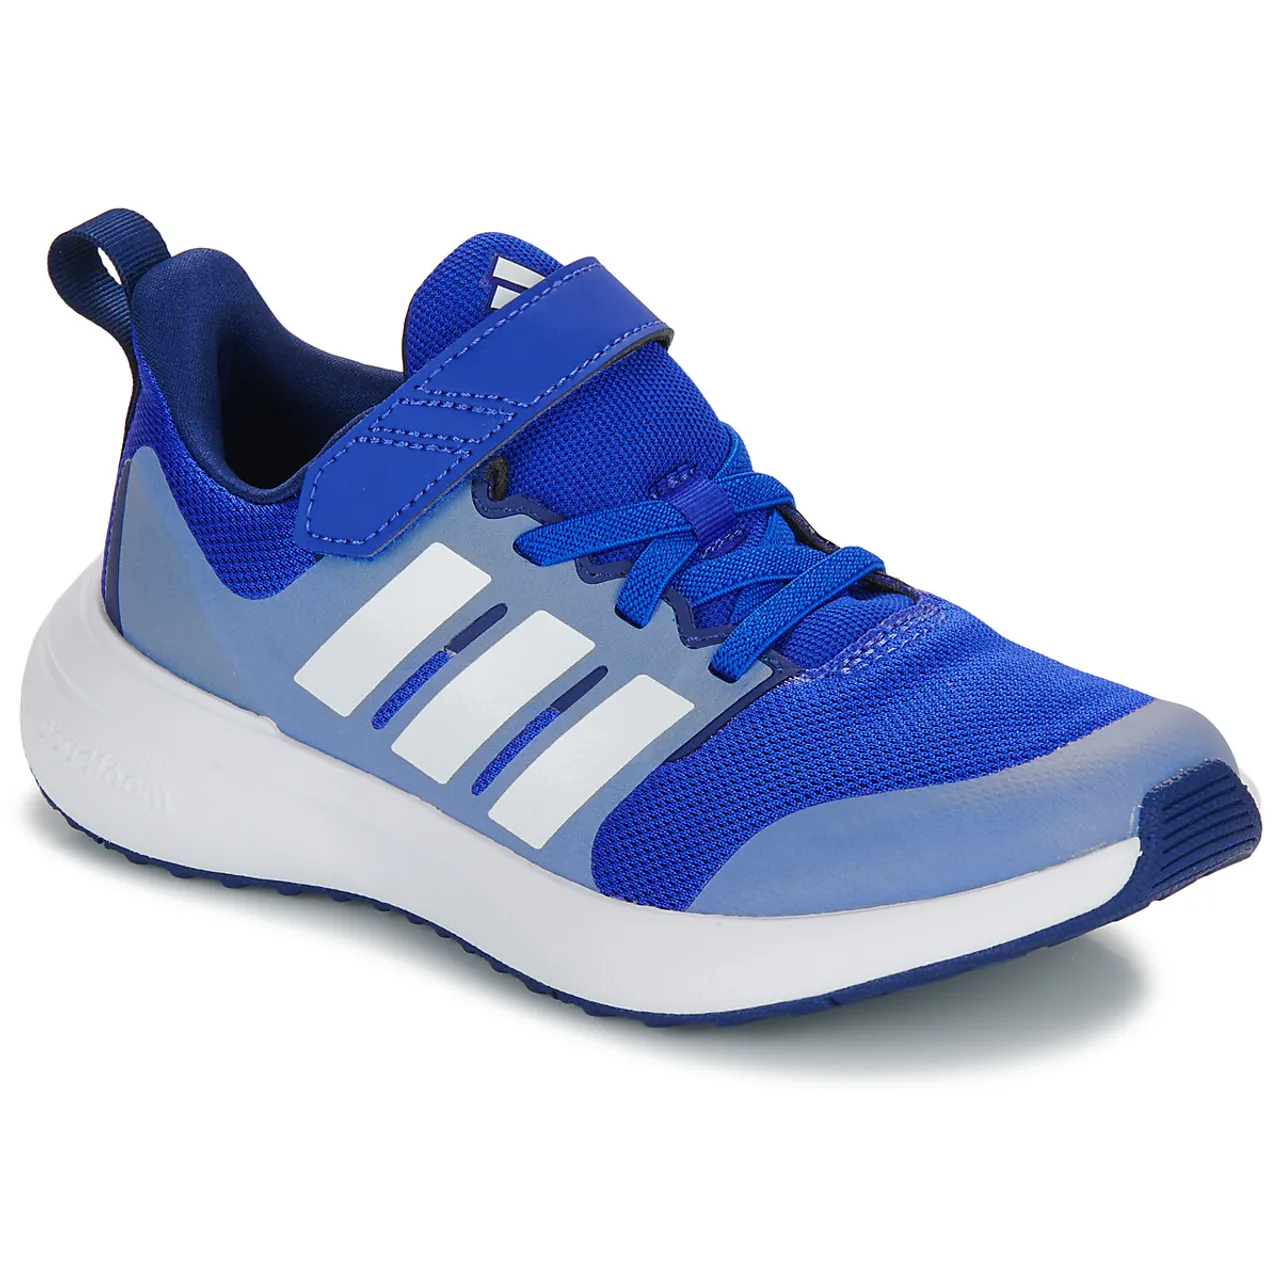 adidas  FortaRun 2.0 EL K  boys's Children's Shoes (Trainers) in Blue